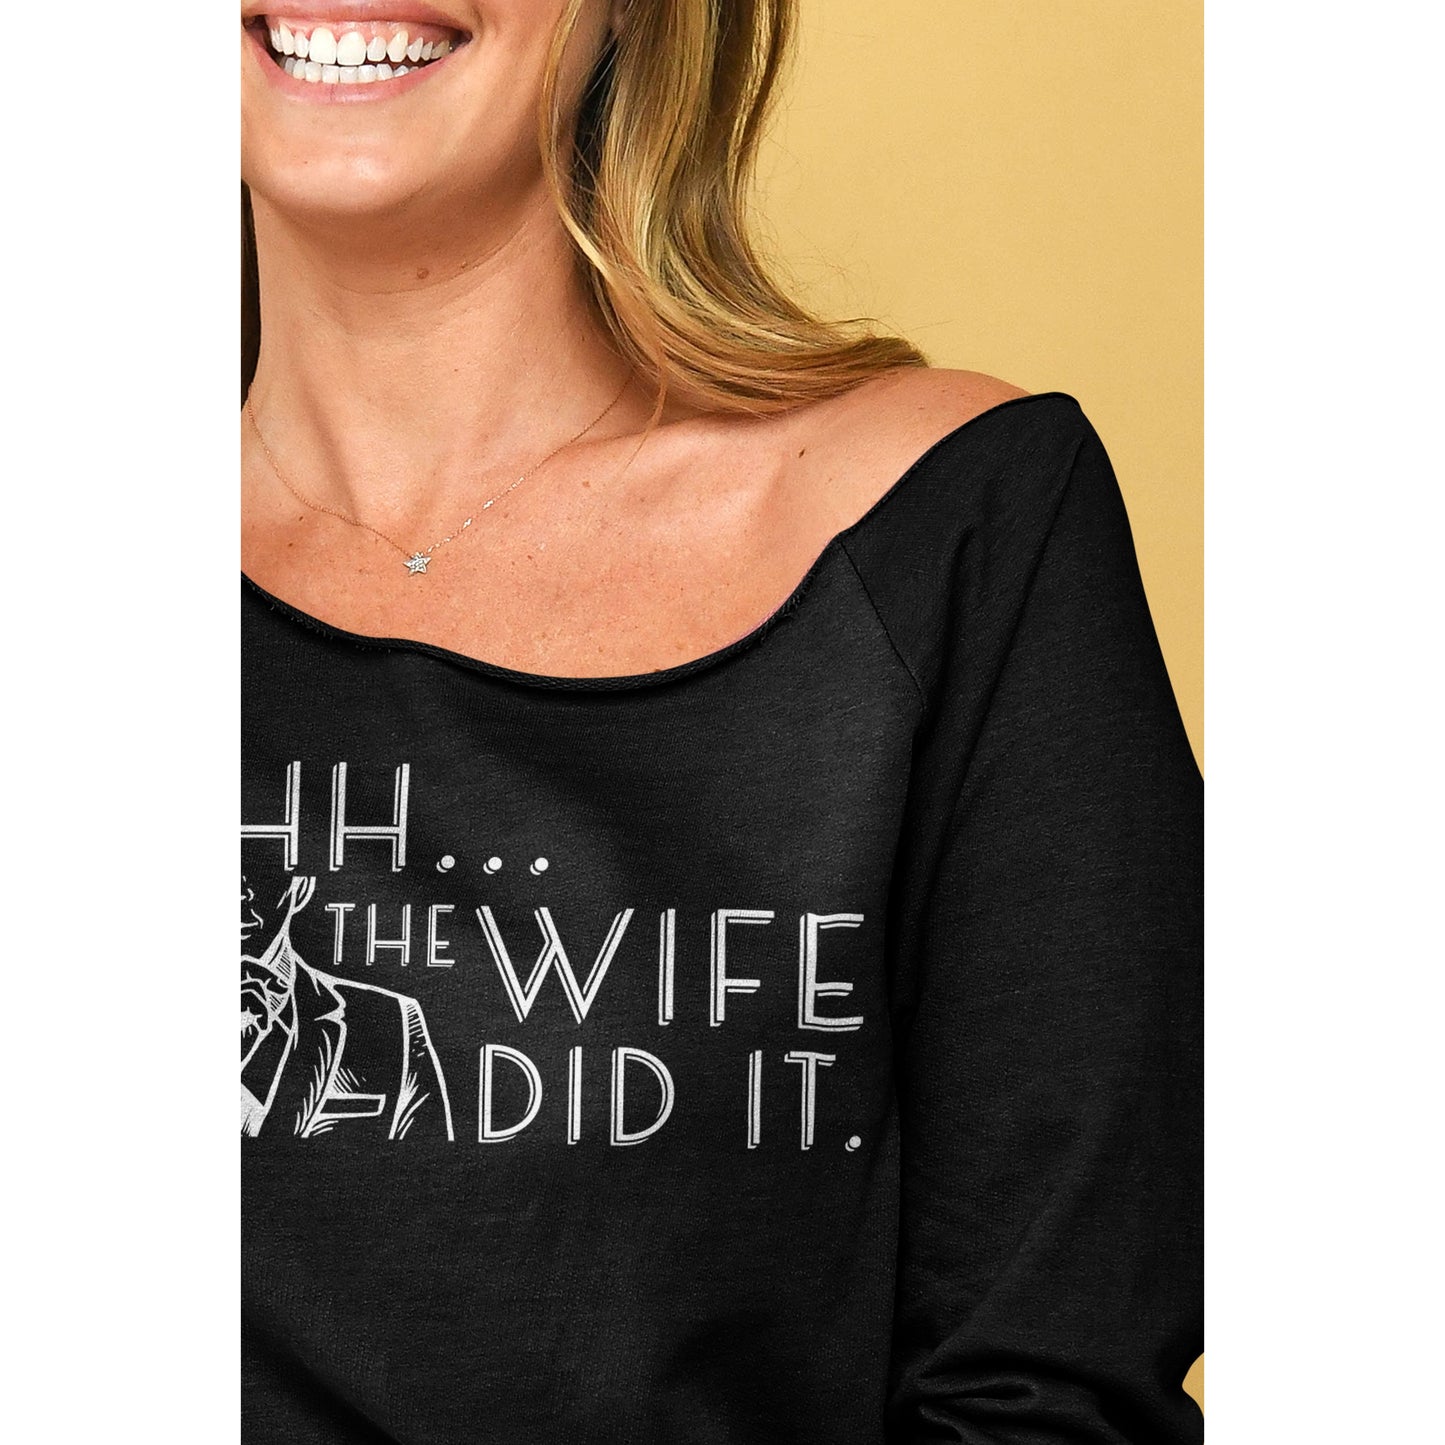 Shhh, The Wife Did It - threadtank | stories you can wear